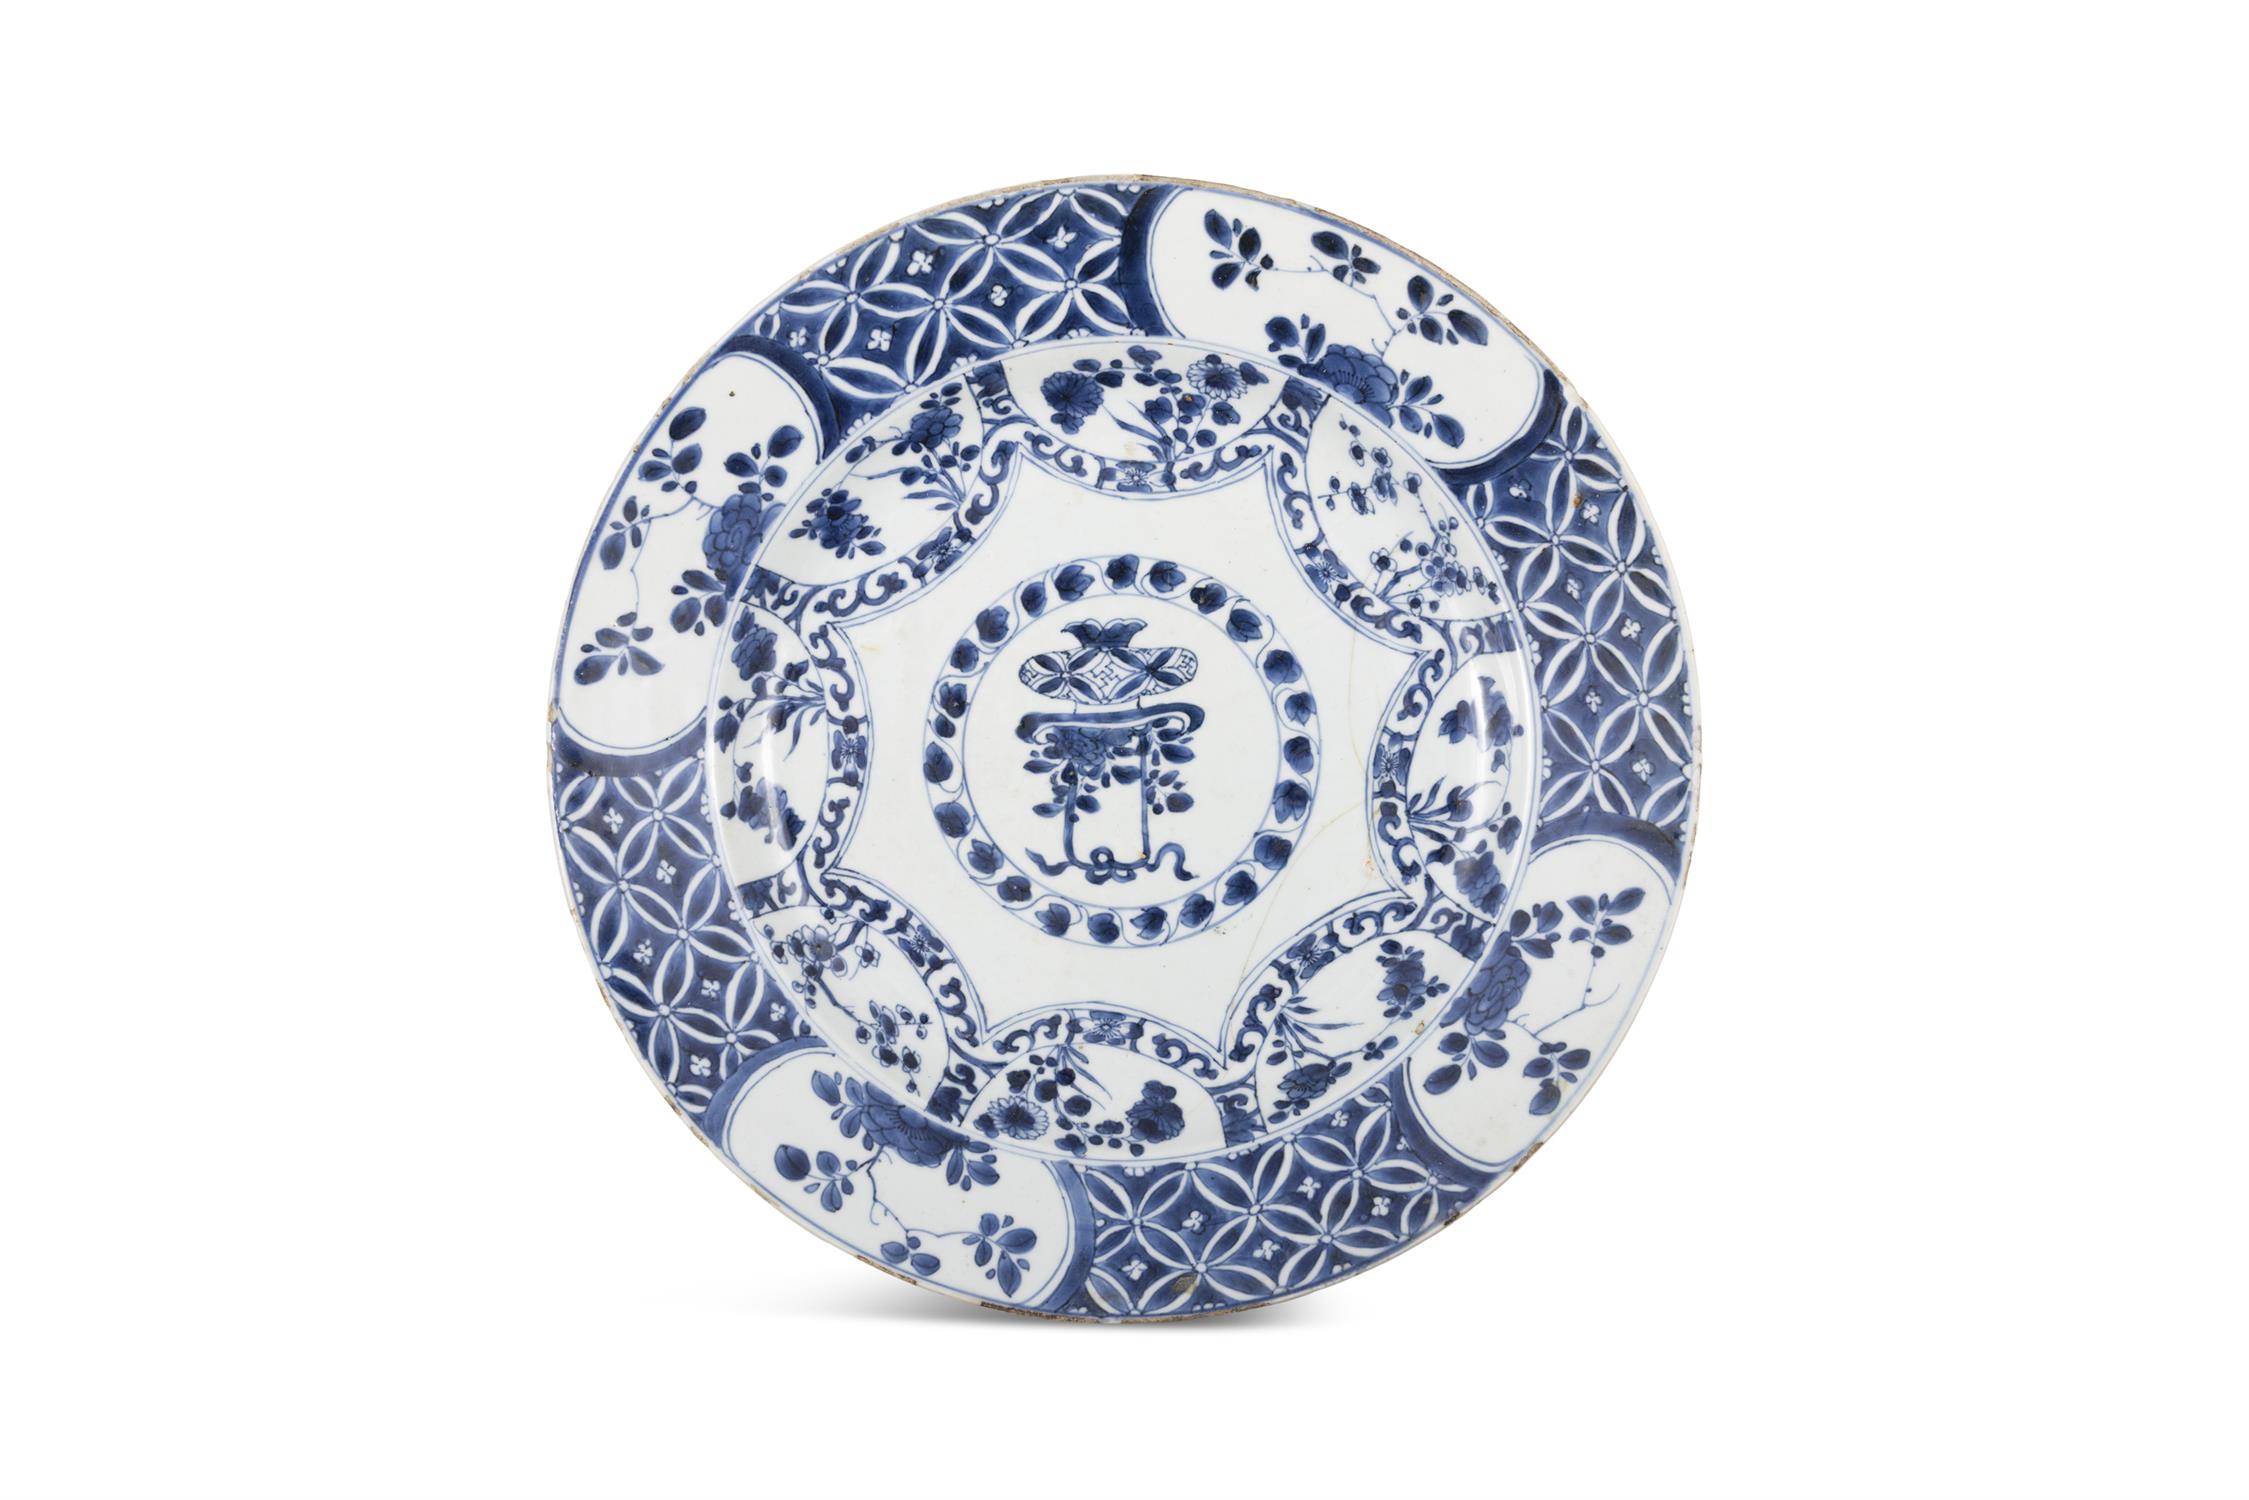 TWO BLUE AND WHITE 'KRAAK' CHARGERS, DECORATED WITH FLOWERS, ONE MARKED WITH A KITE 18世紀 - Image 2 of 3